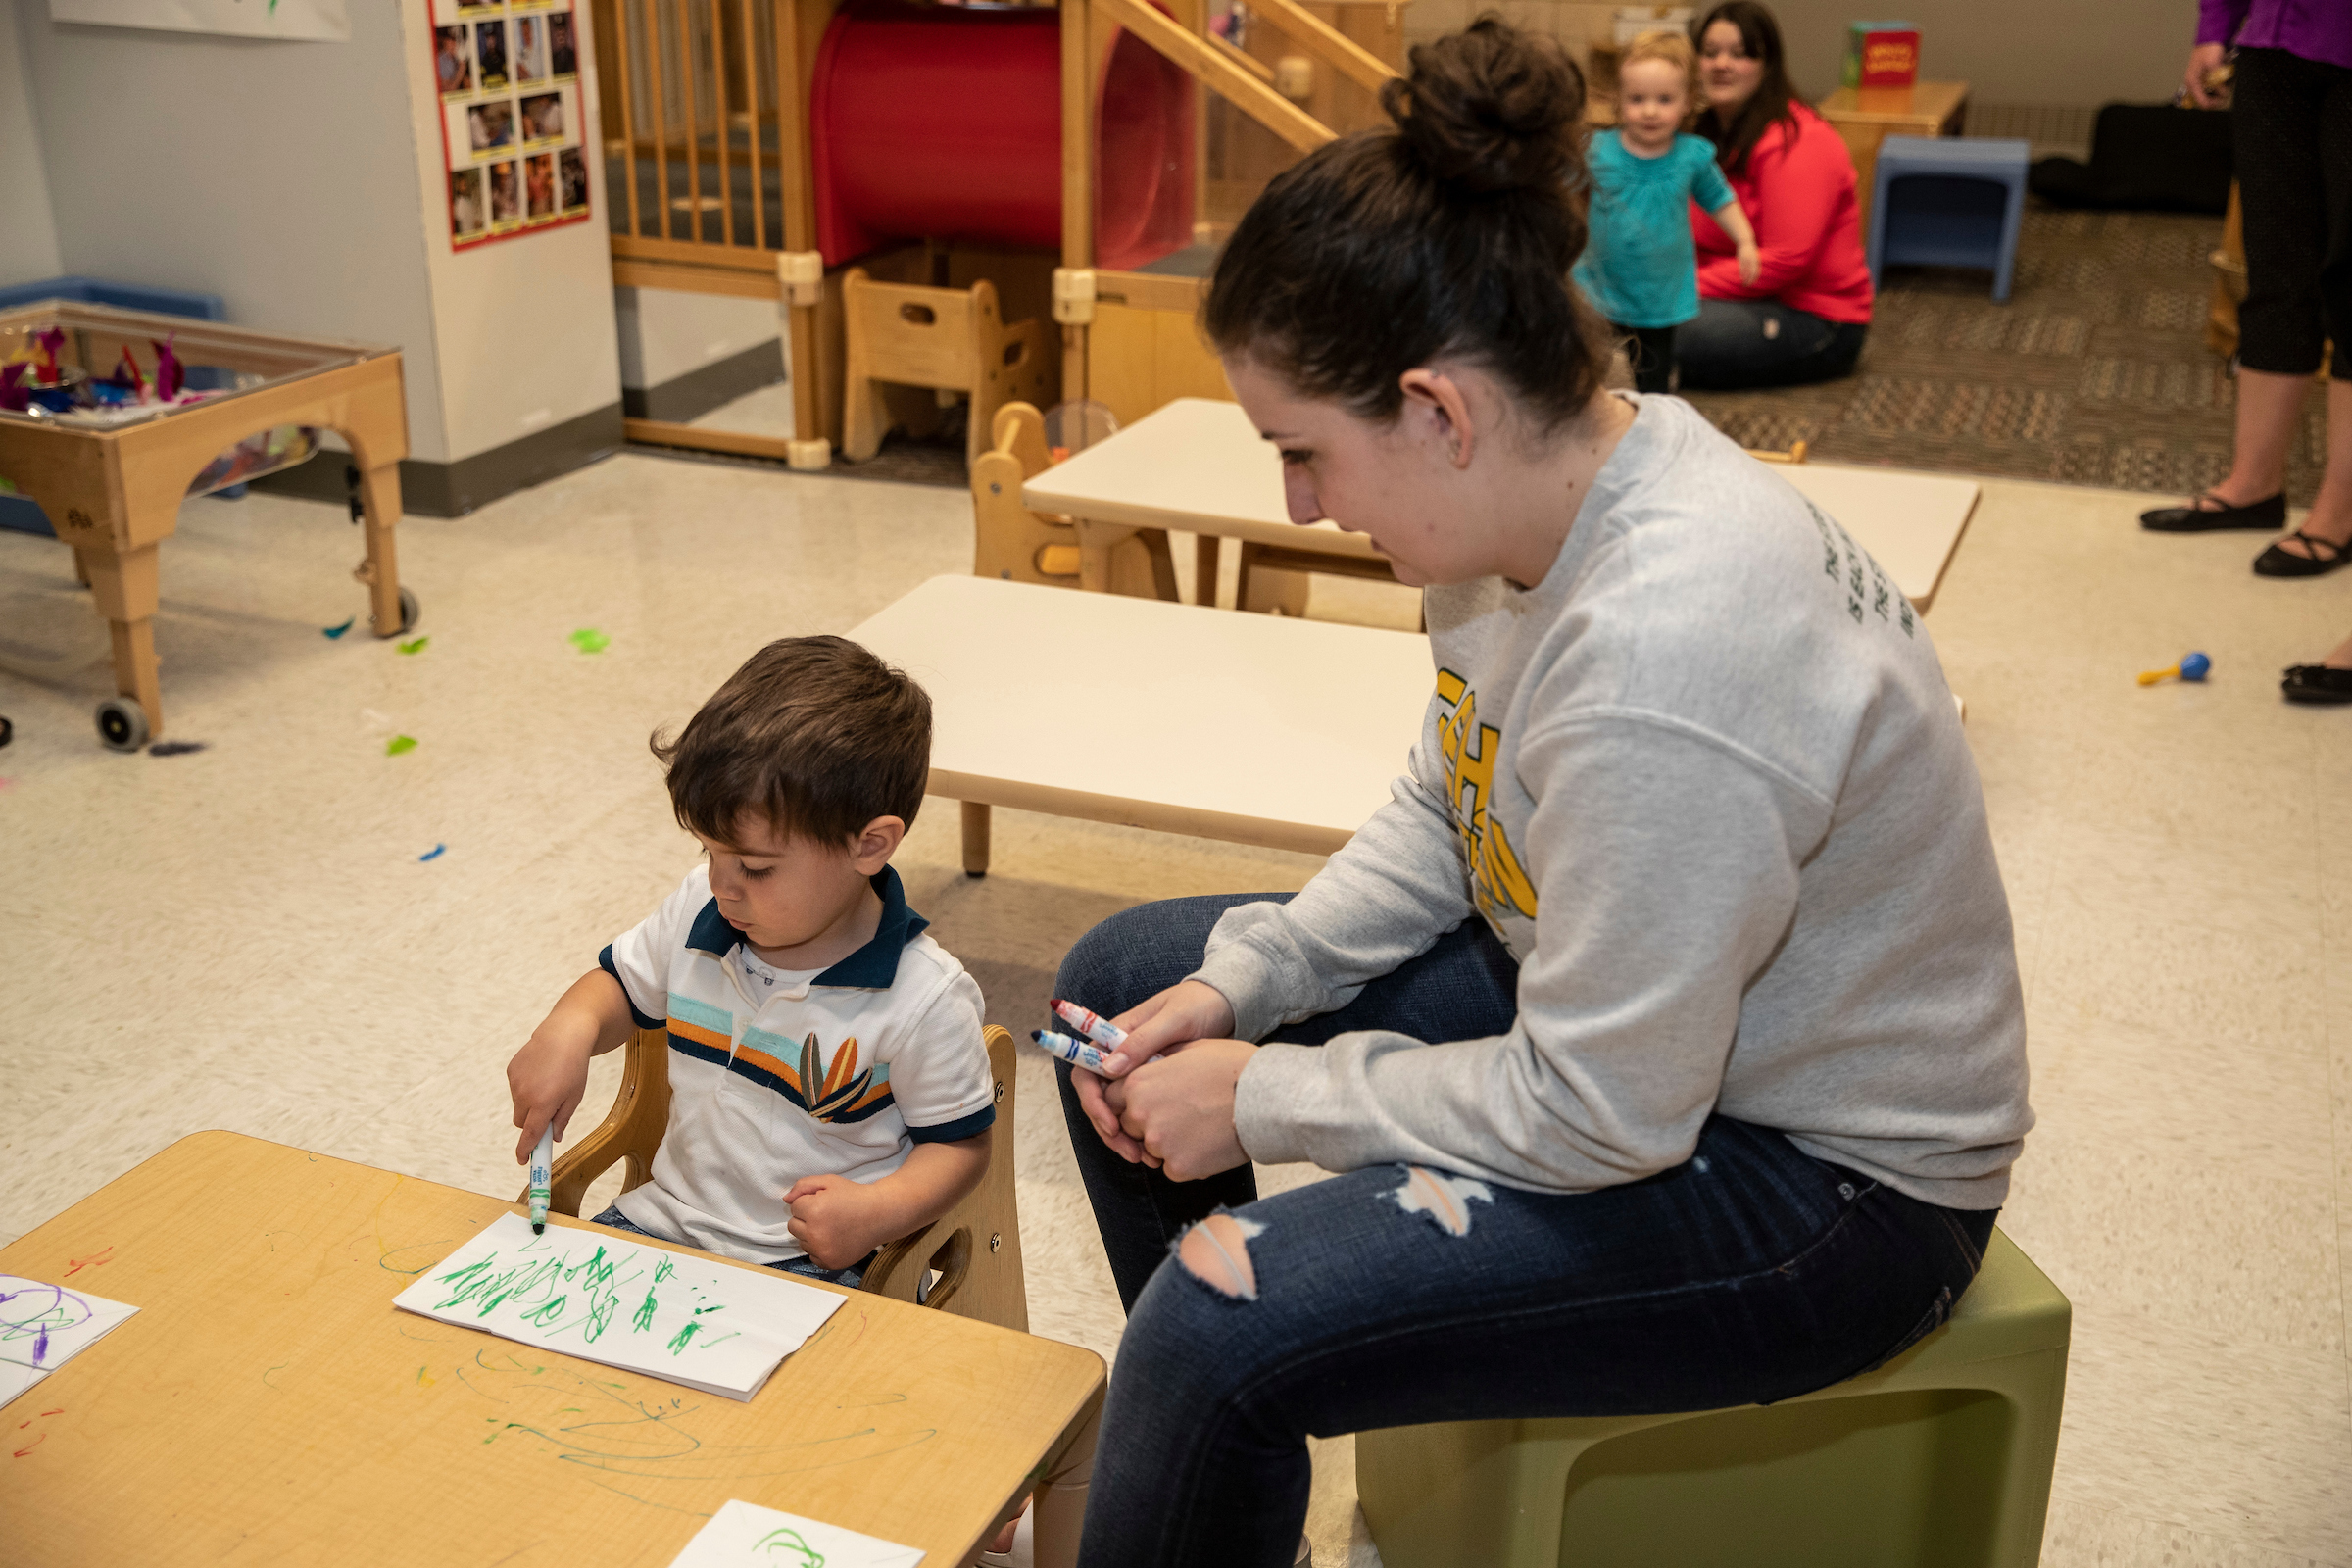 Early childhood education at CDC